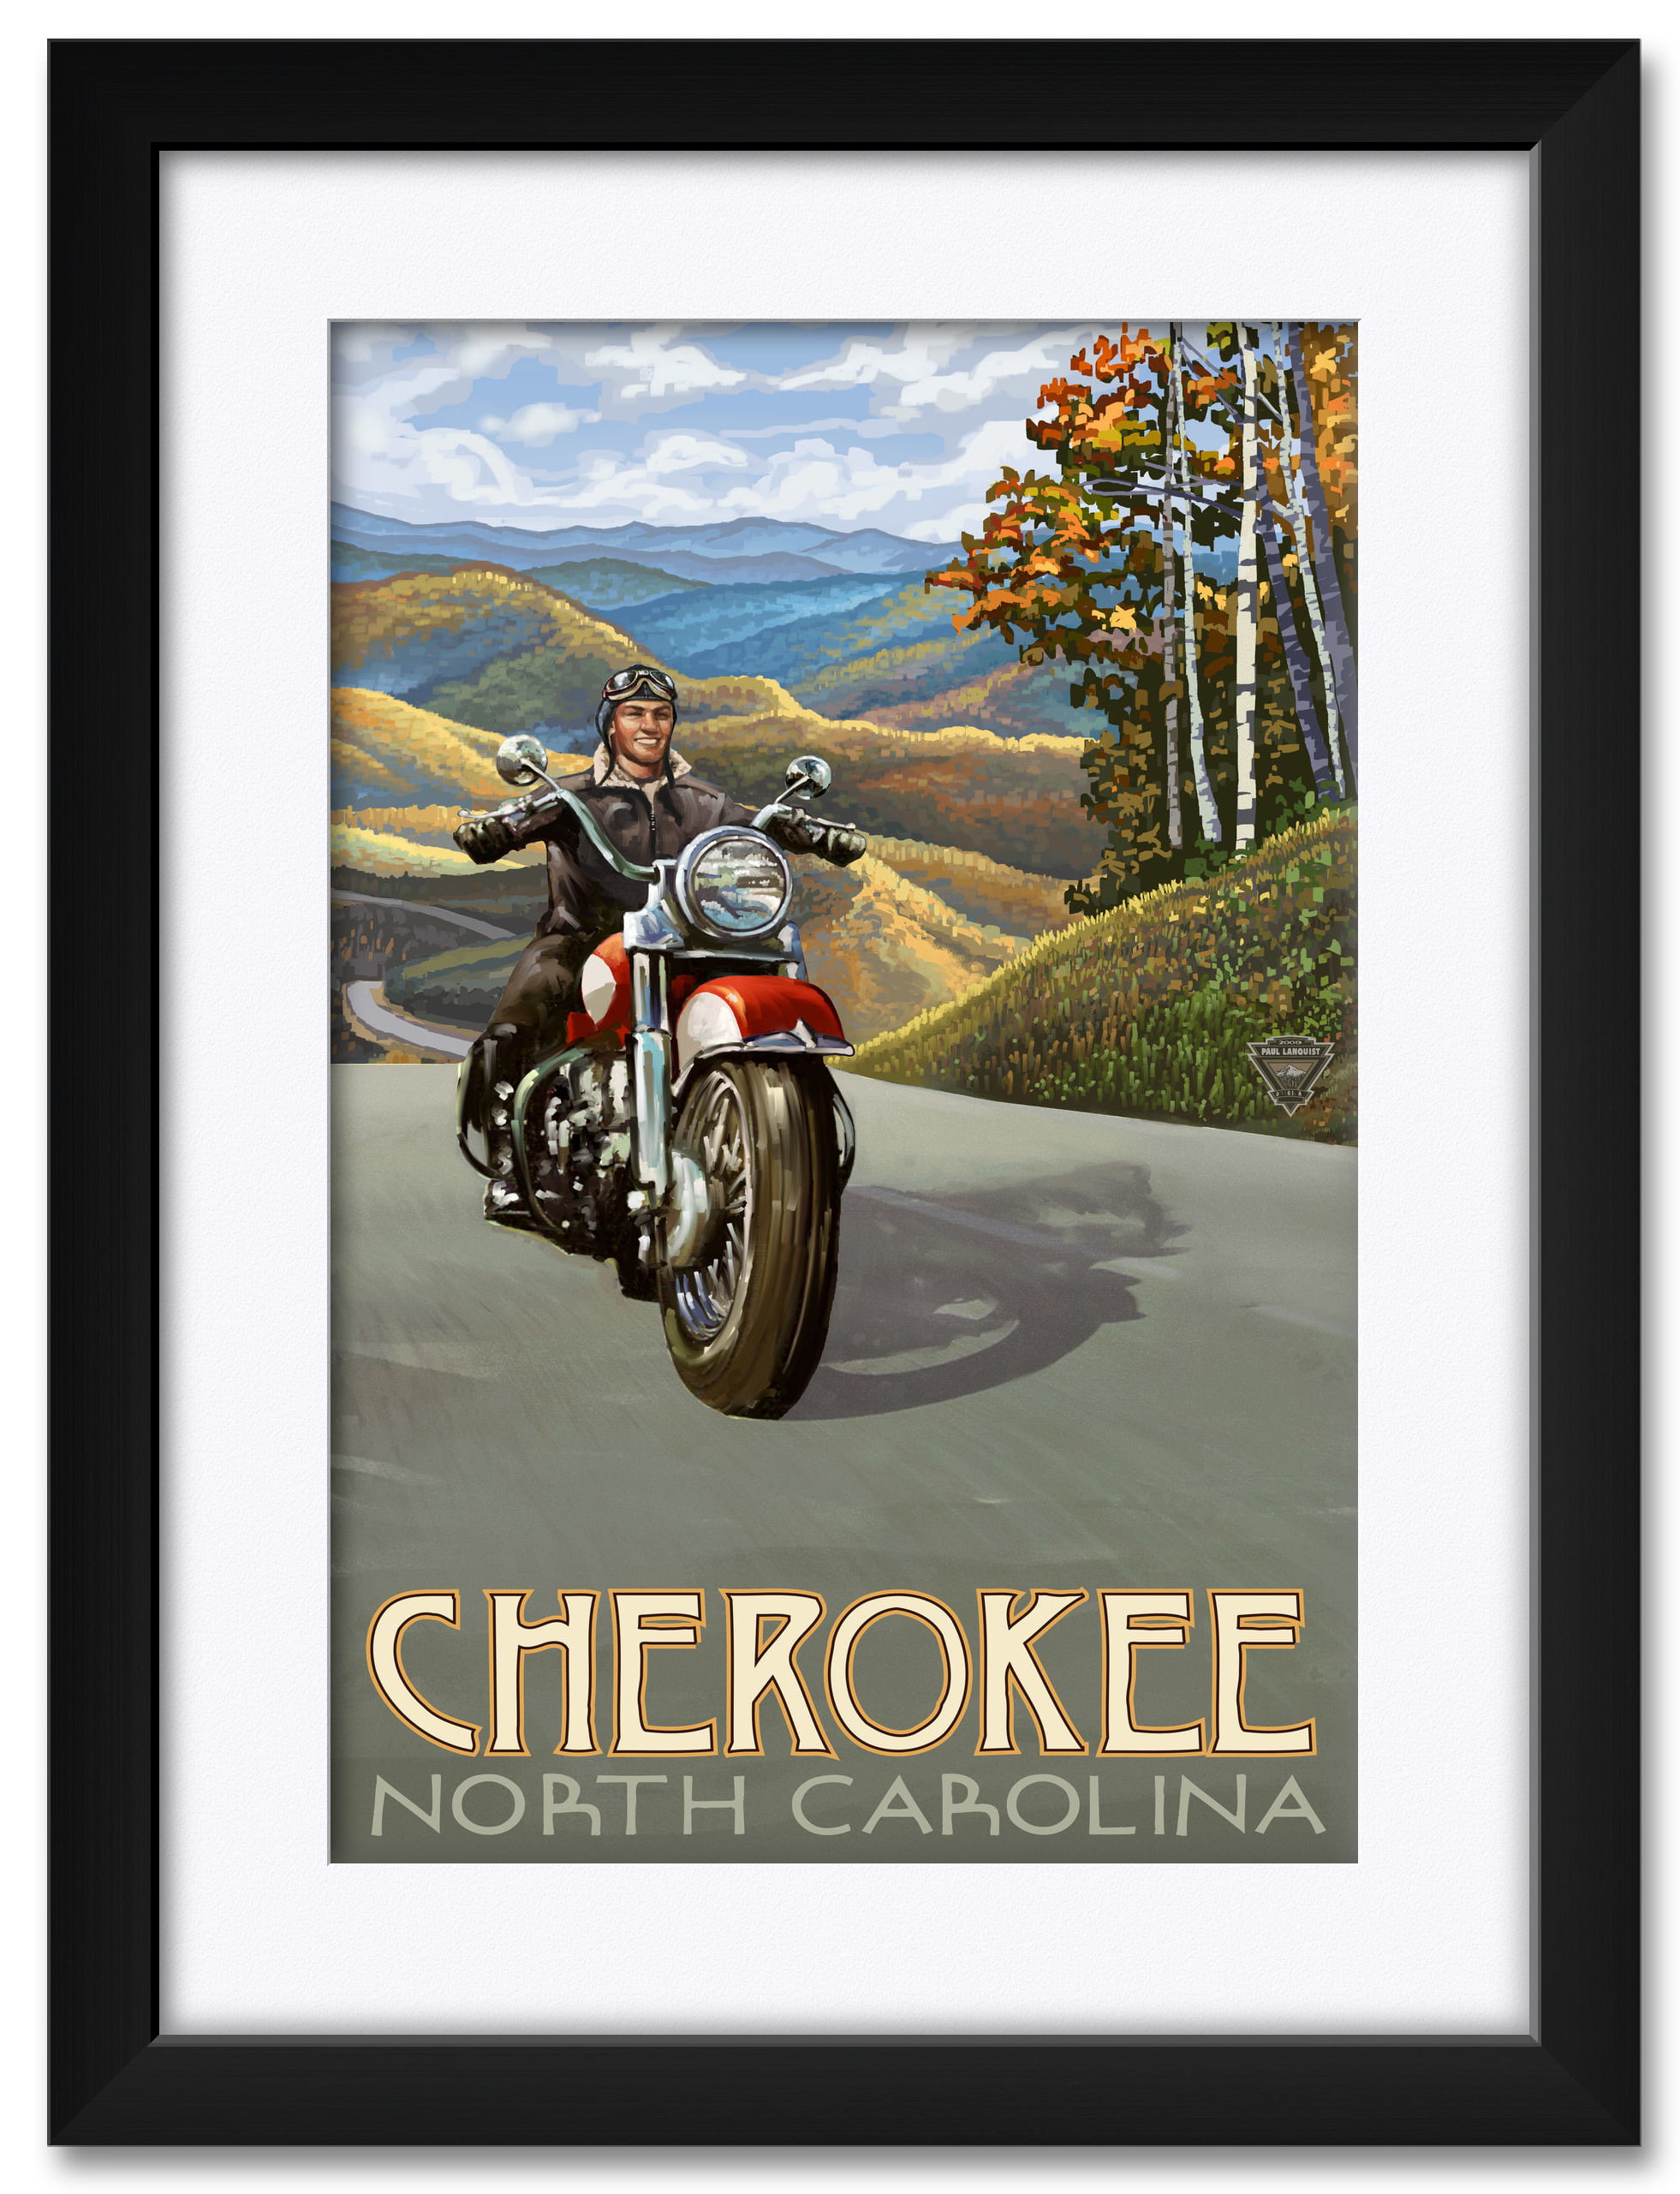 Front View of Red Motorcycle Photo Art Print Framed Poster 14x20